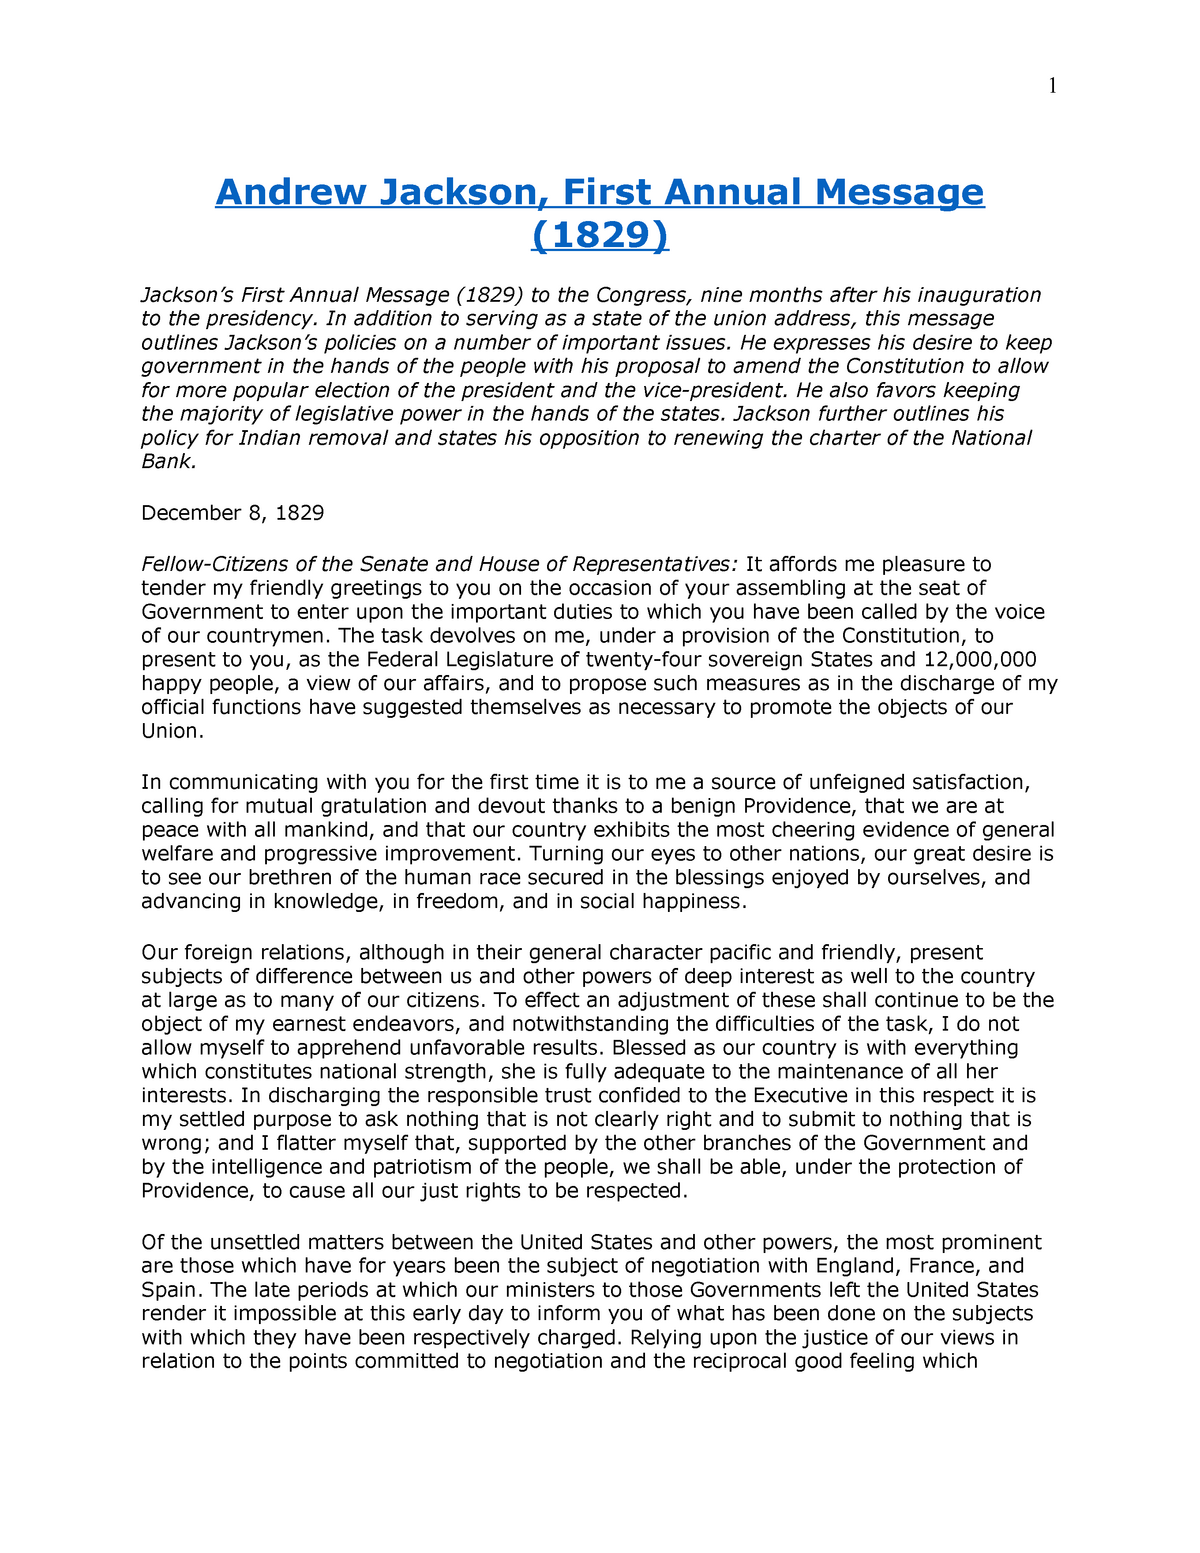 andrew jackson first annual message to congress